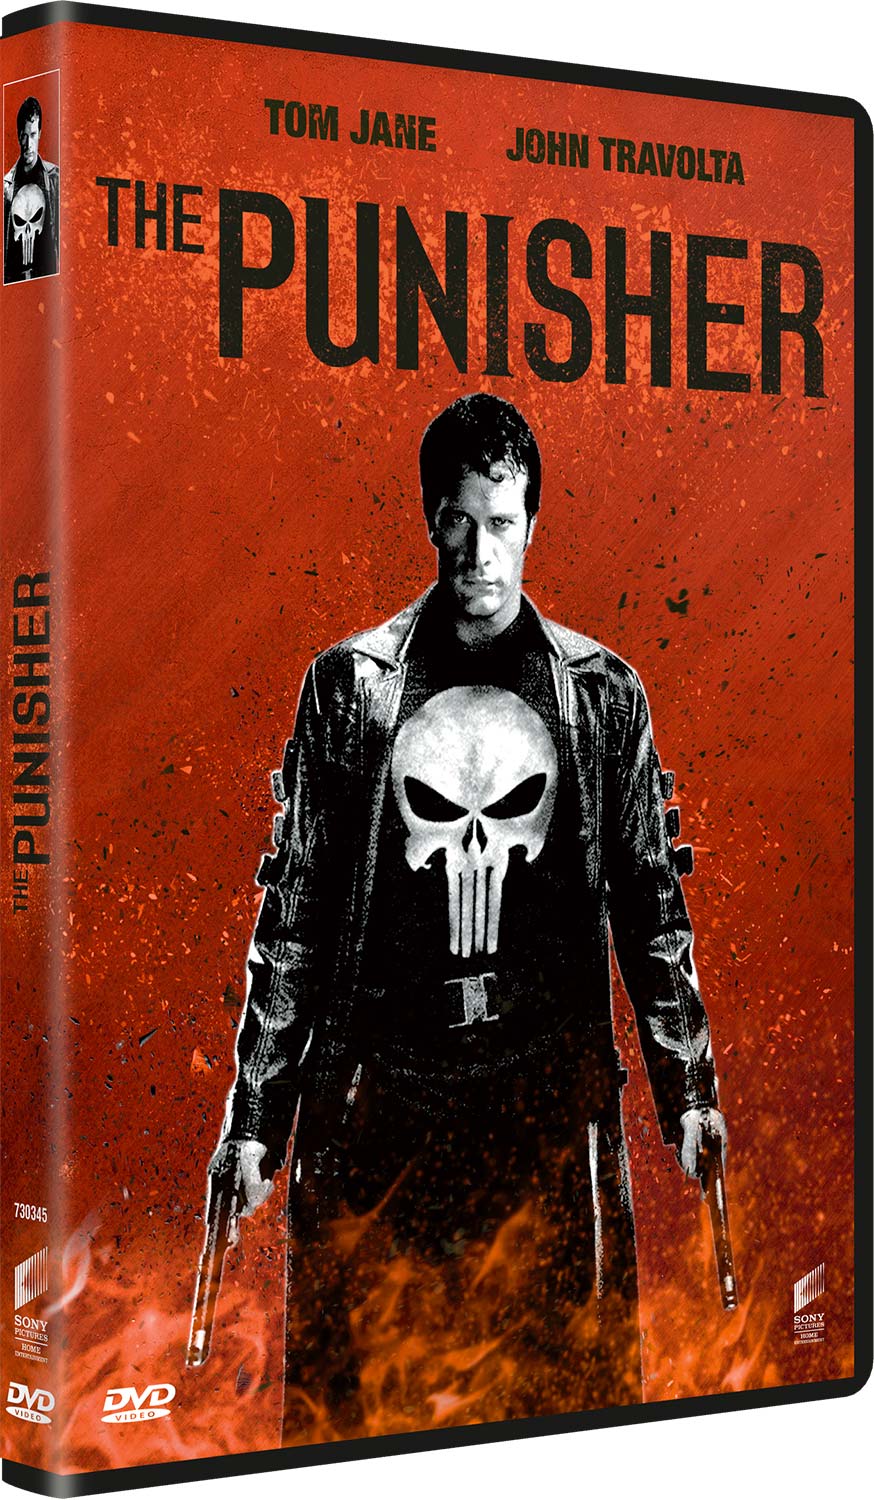 THE PUNISHER - DVD